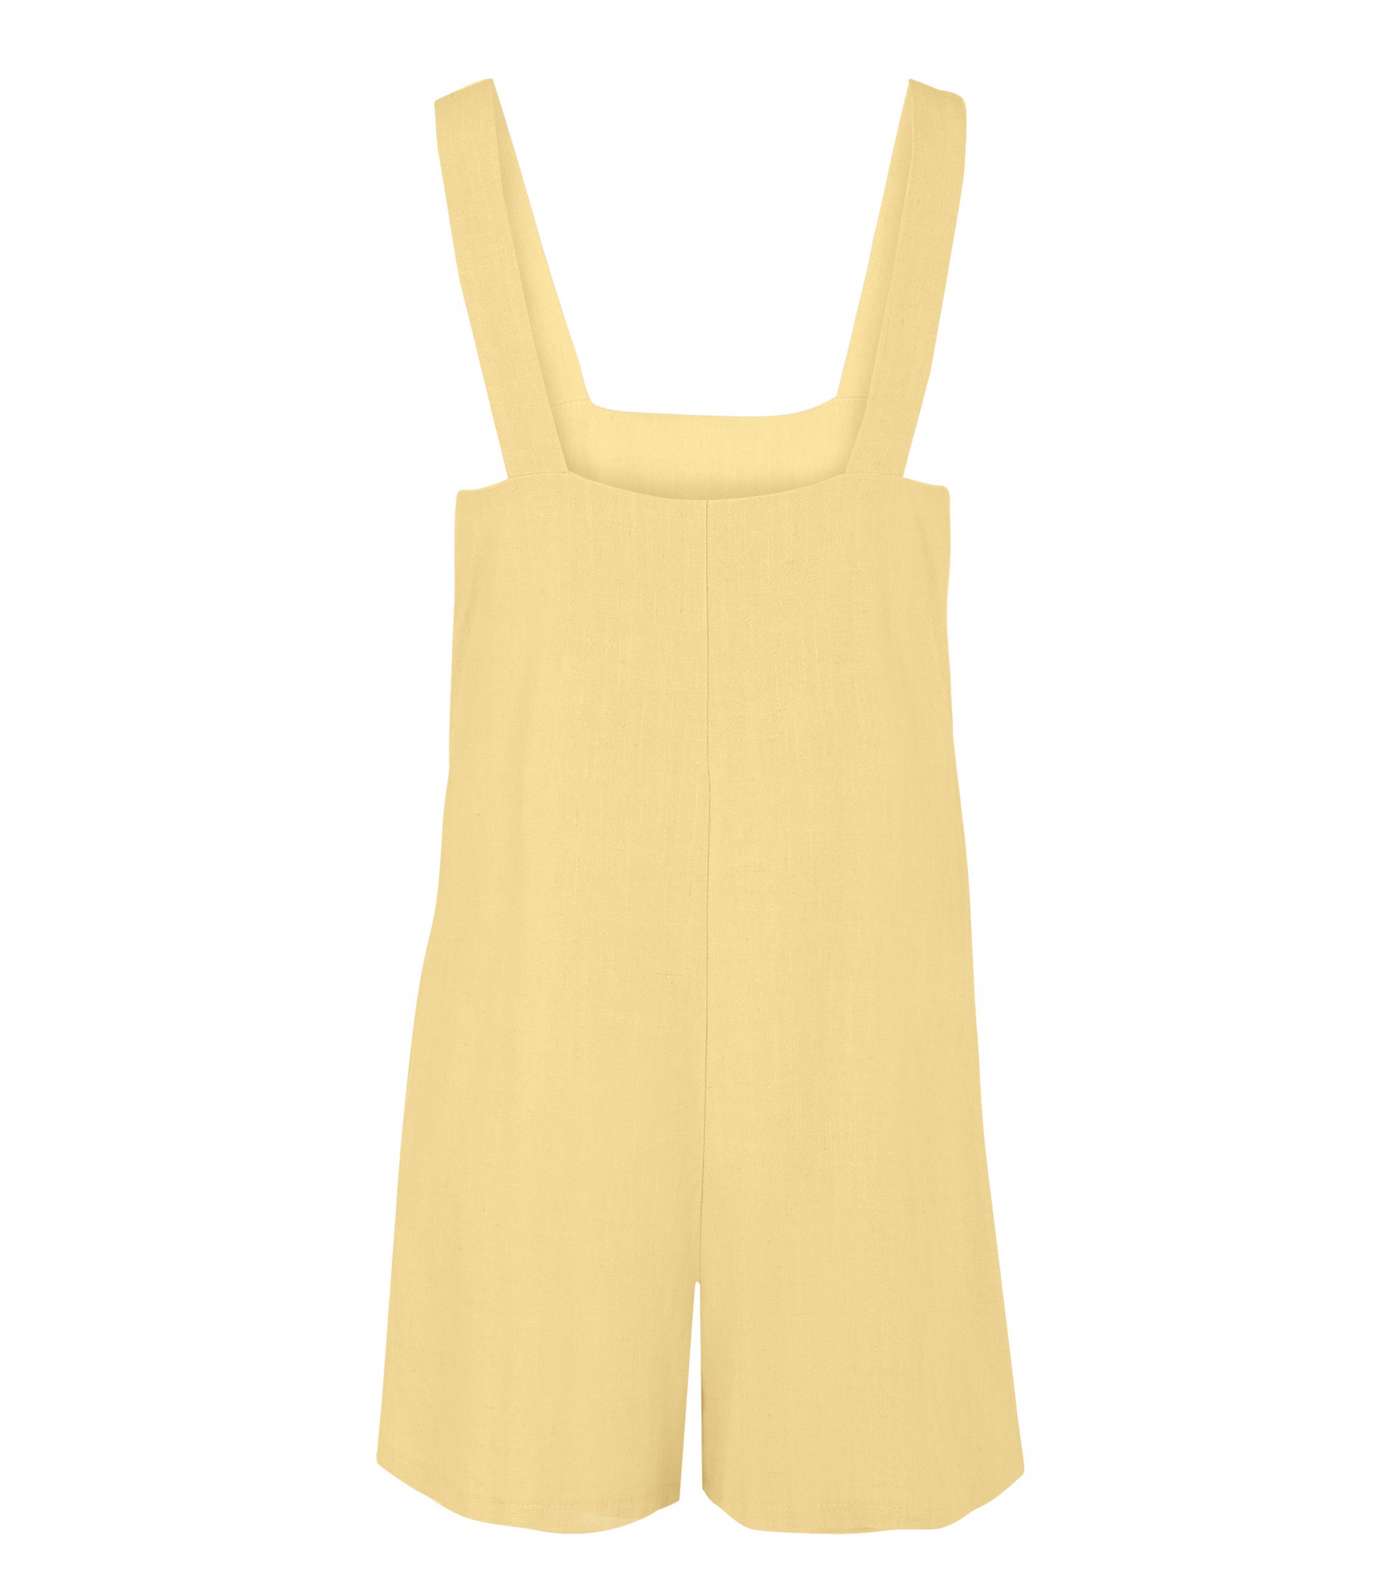 Pale Yellow Linen Look Romper Playsuit Image 2